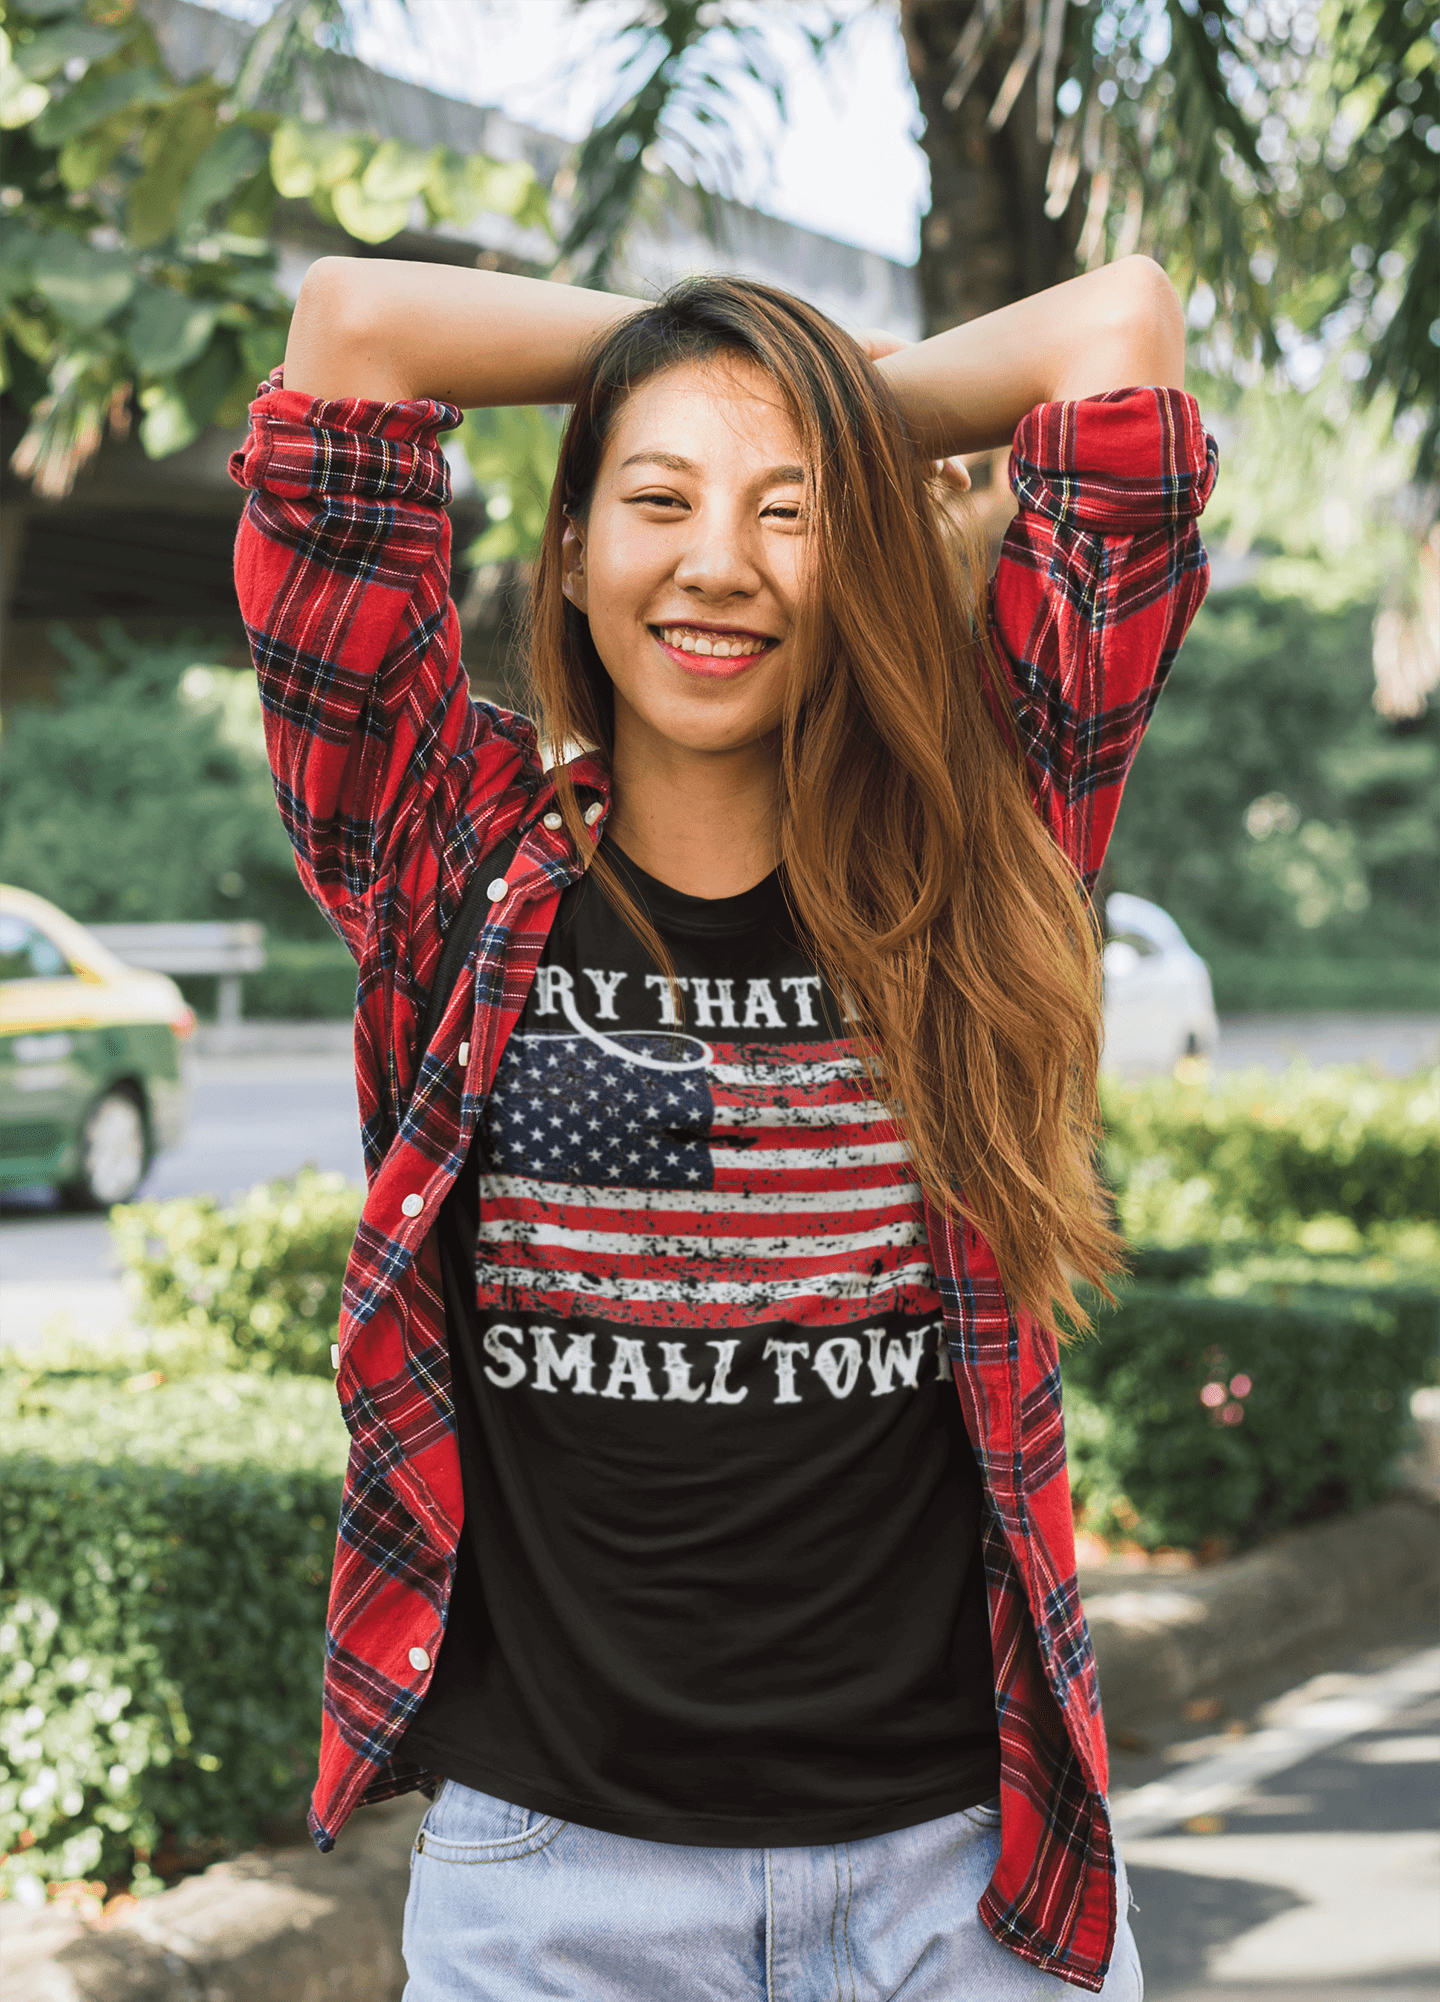 Short Sleeve T-Shirt Try That in Small town Distressed USA Flag Unisex Tee - TopKoalaTee